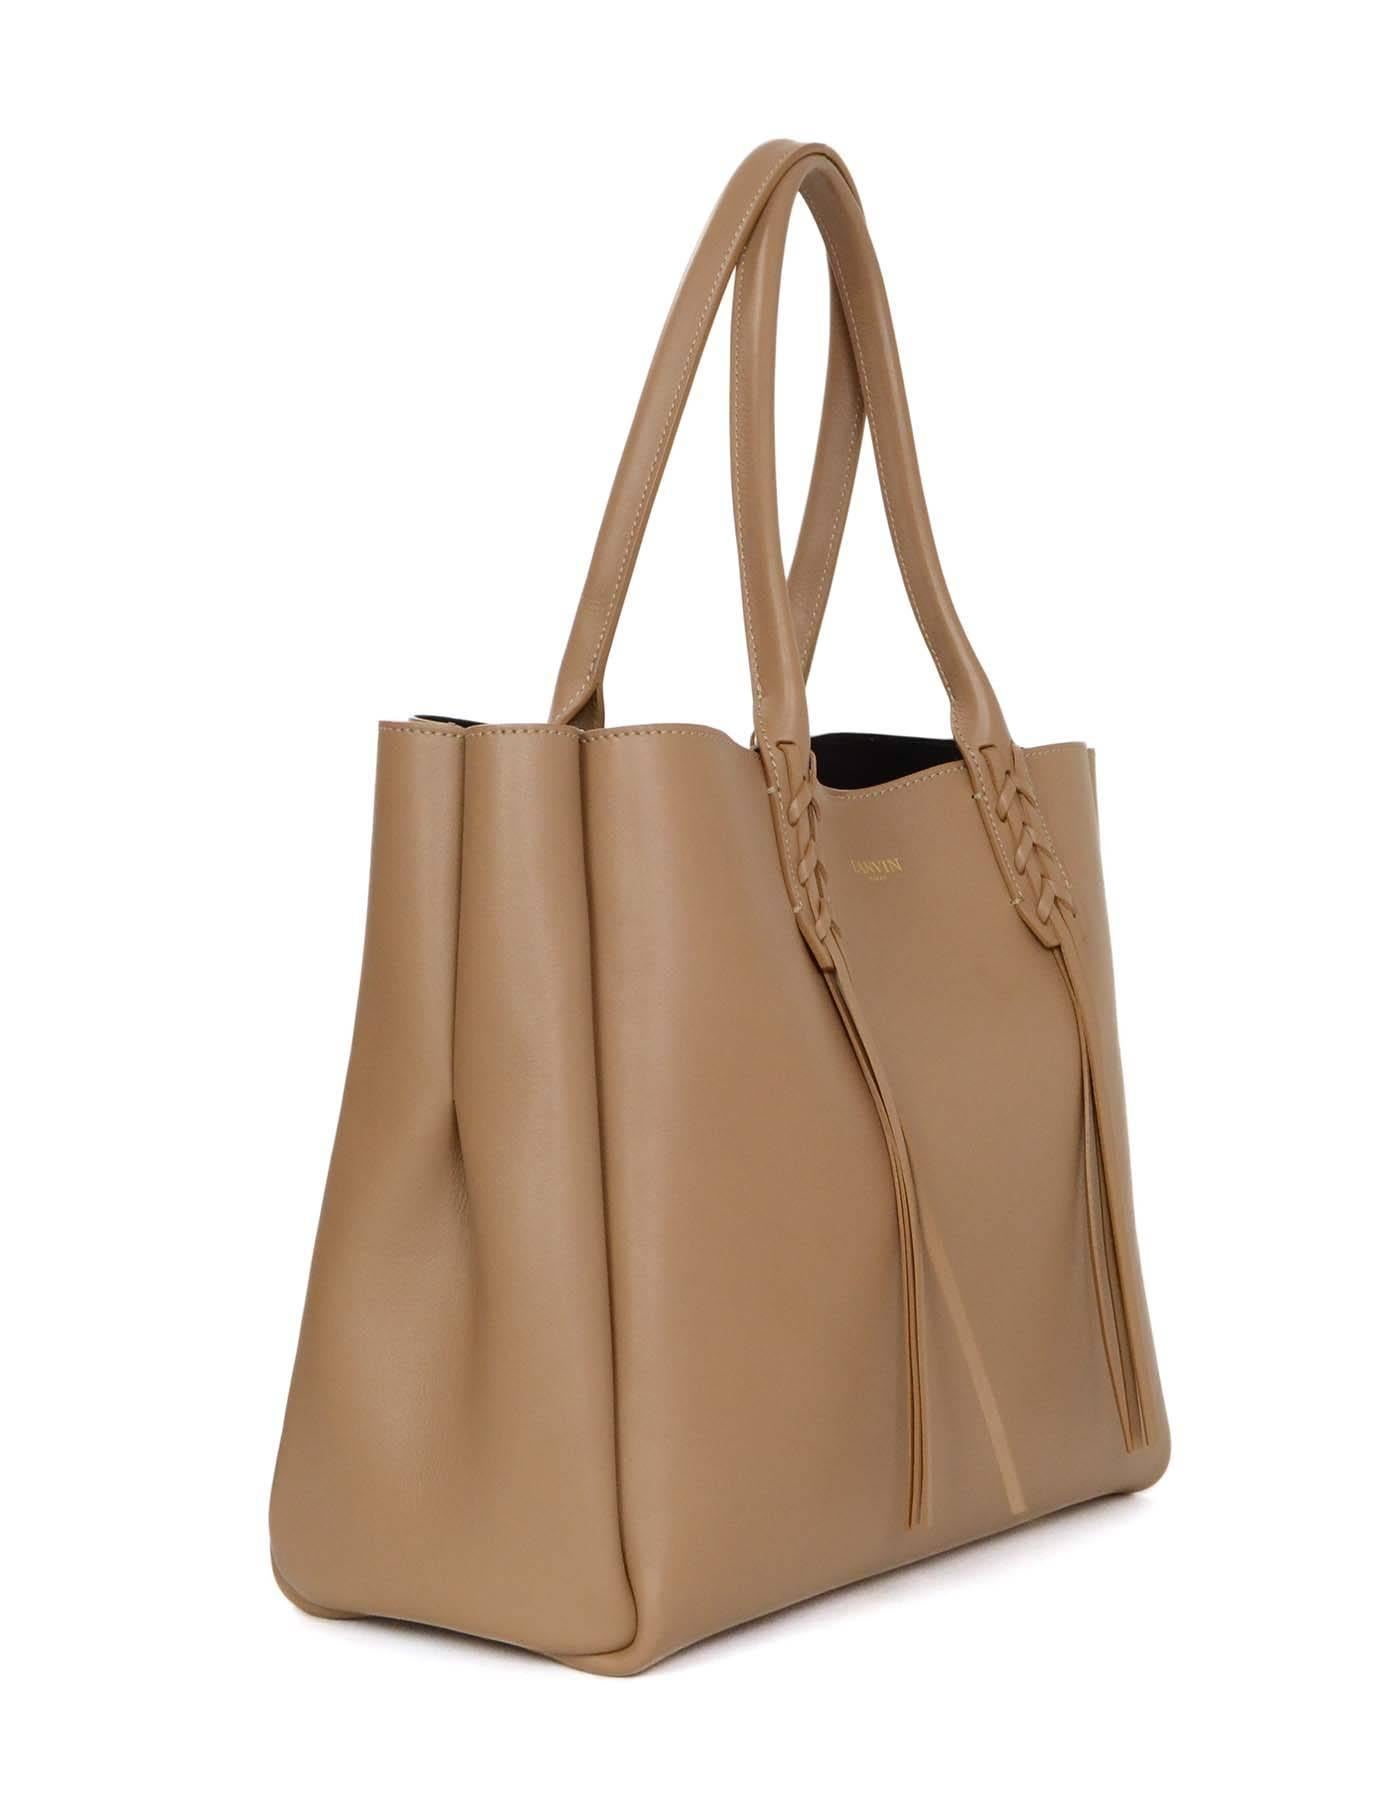 Lanvin Taupe Small Shopper Tote
Features fringed tassel detailing and removable zip pouch
Made In: Italy
Color: Taupe
Hardware: Goldtone
Materials: Leather 
Lining: Black suede
Closure/Opening: Open top with lobster clasp over